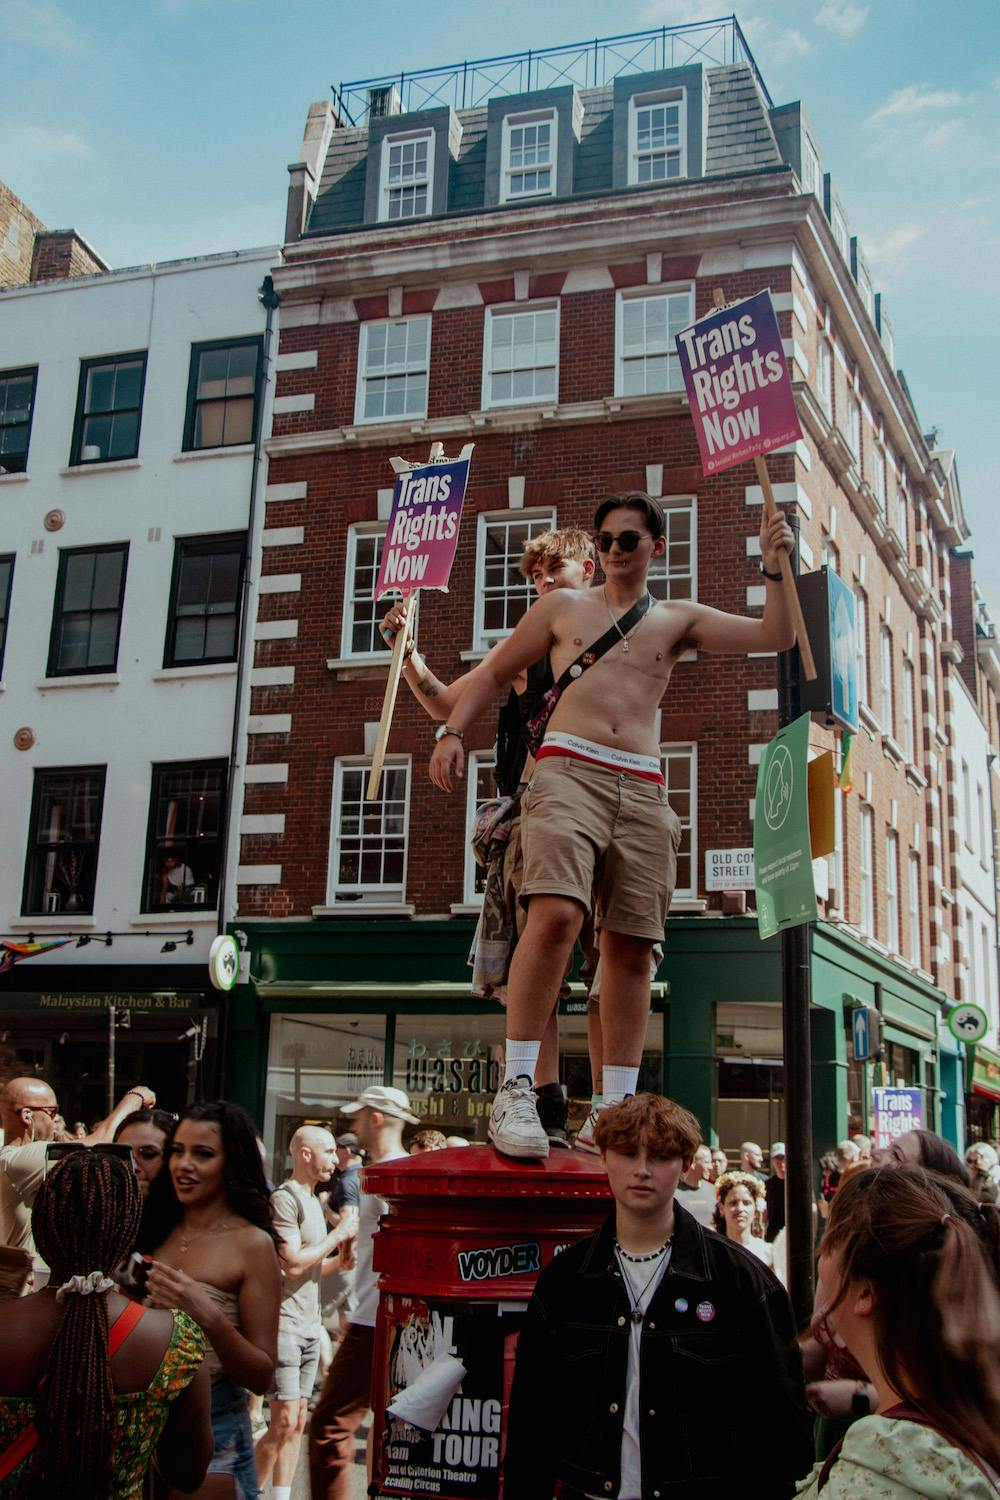 It's about sharing knowledge, pain, joy': meet the people marching in  London's Trans Pride